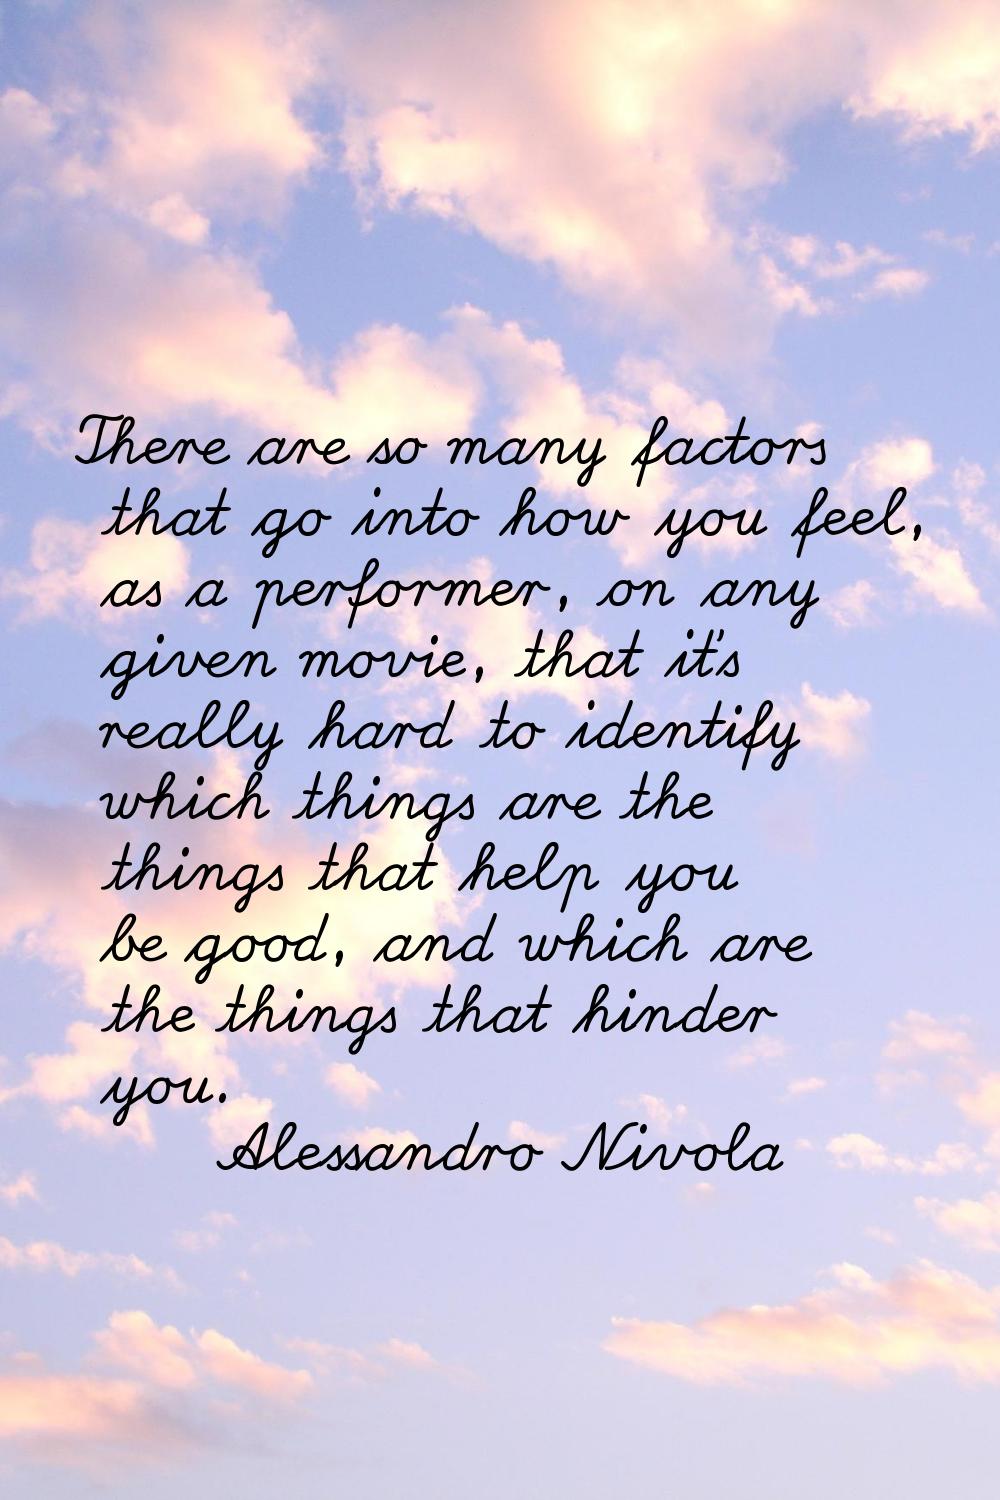 There are so many factors that go into how you feel, as a performer, on any given movie, that it's 